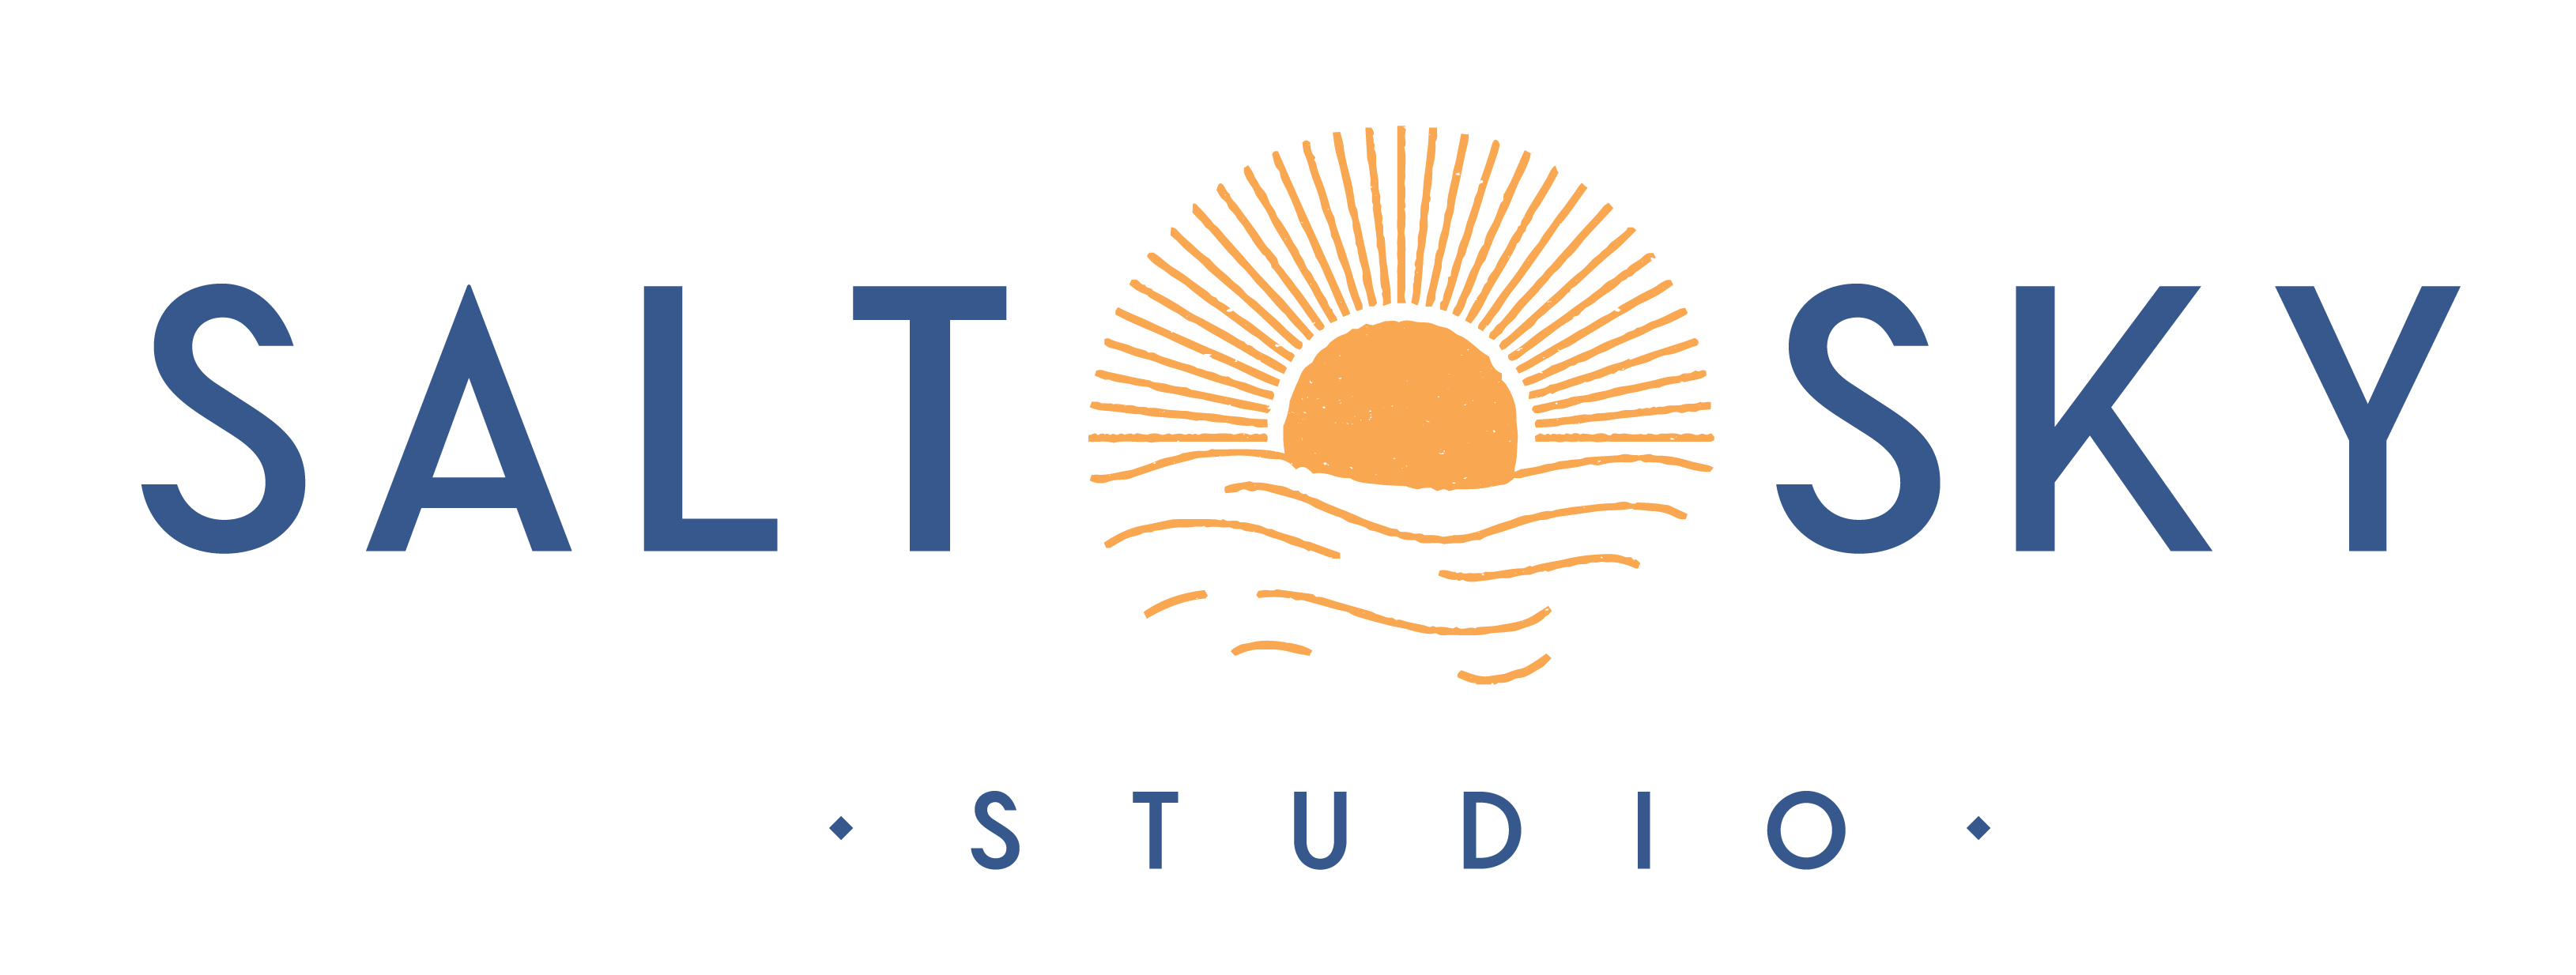 A logo with Salt Sky Studio written in navy blue with a yellow sun and rays of light.